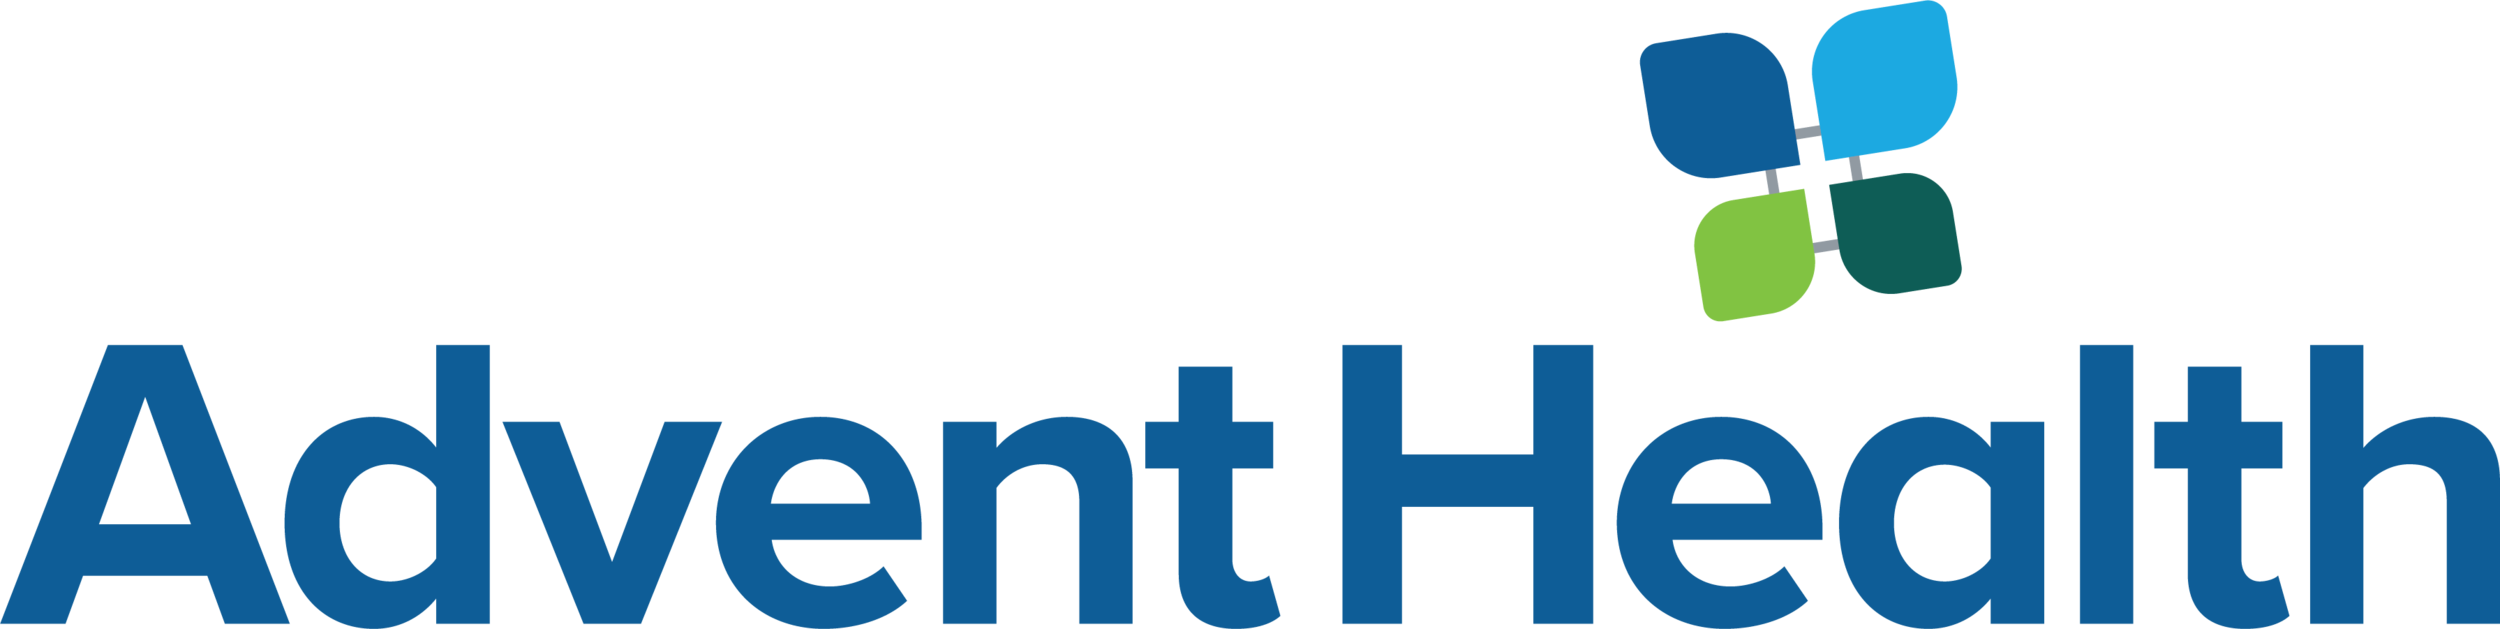 AdventHealth_global_4C.png